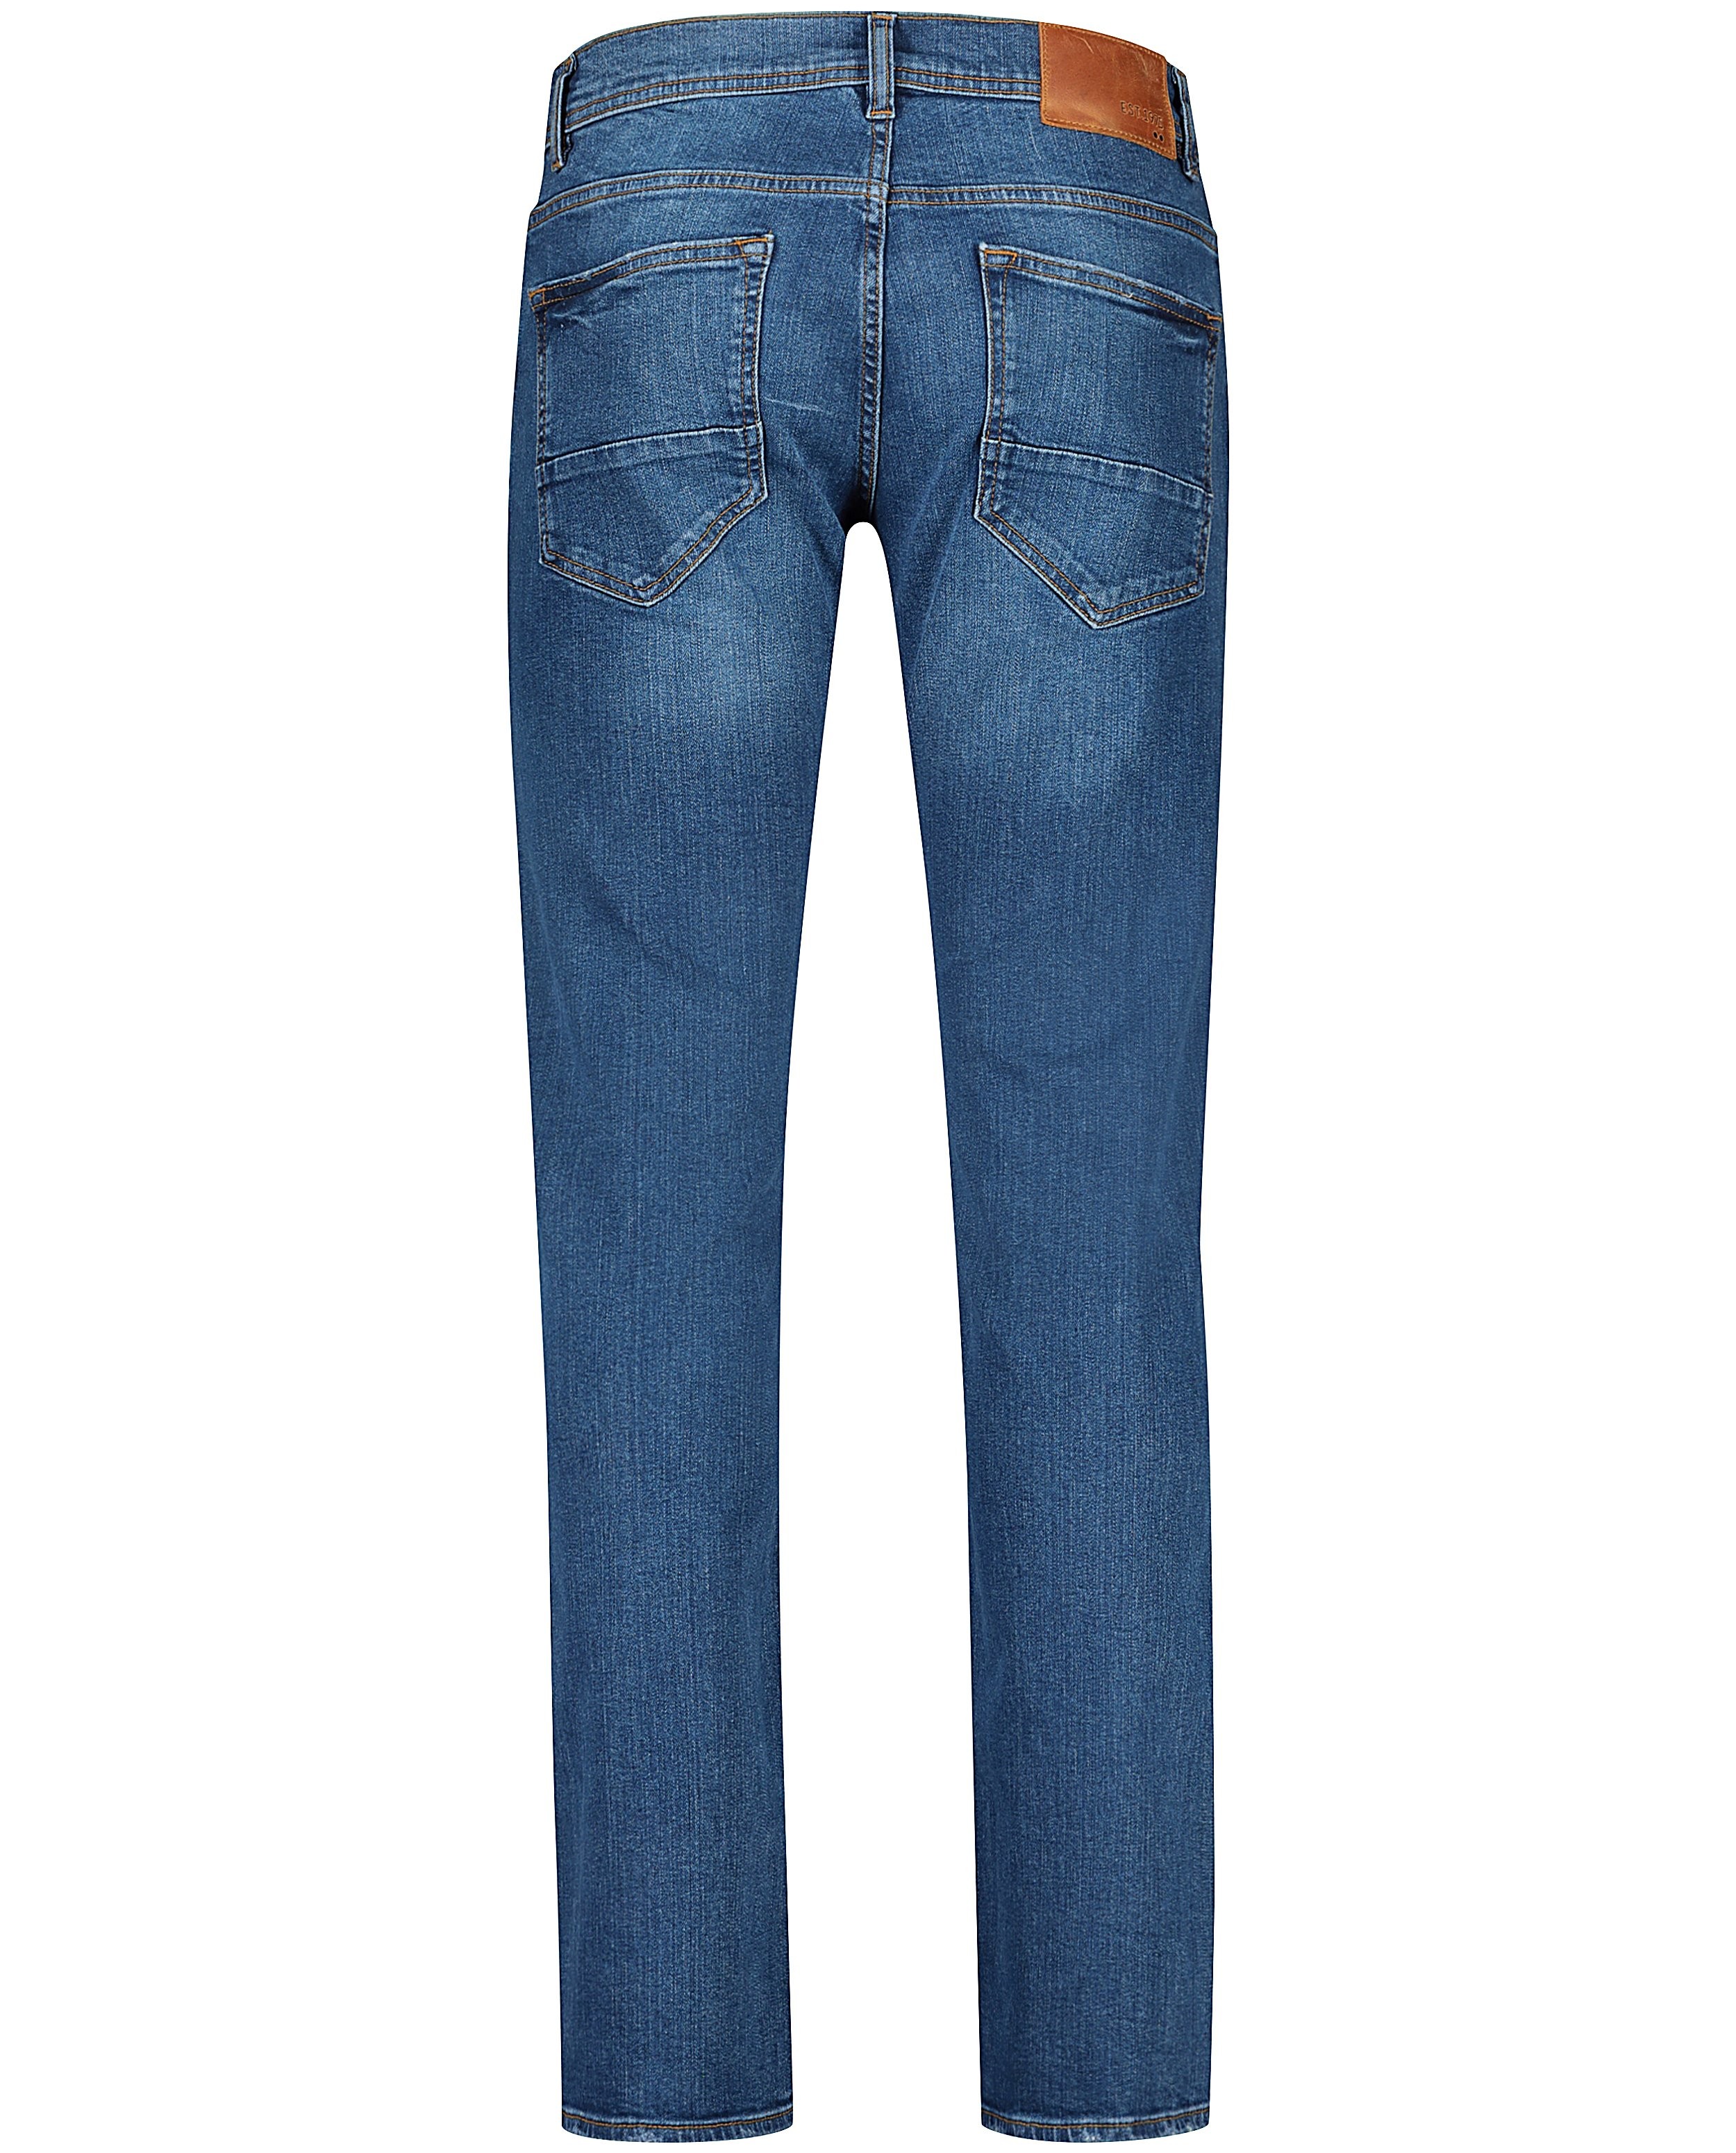 Jeans - Jeans fitted straight 